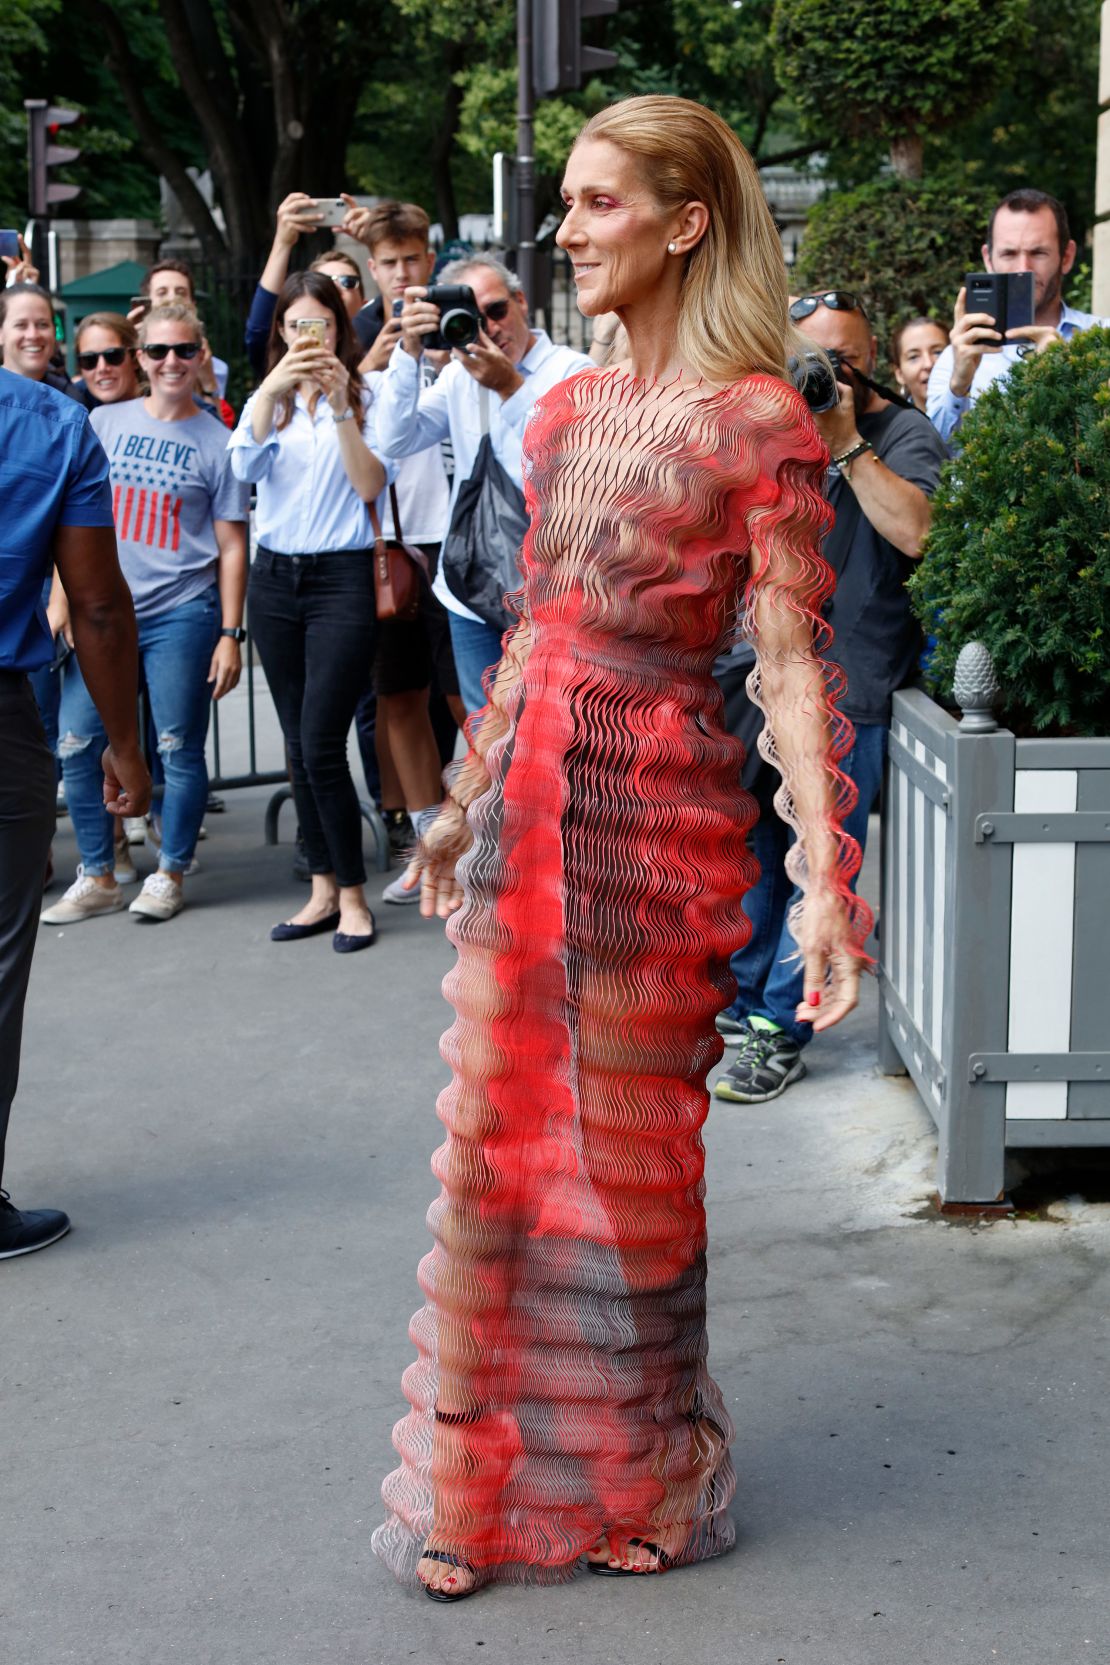 Photos of Céline Dion's Best Outfits of 2019